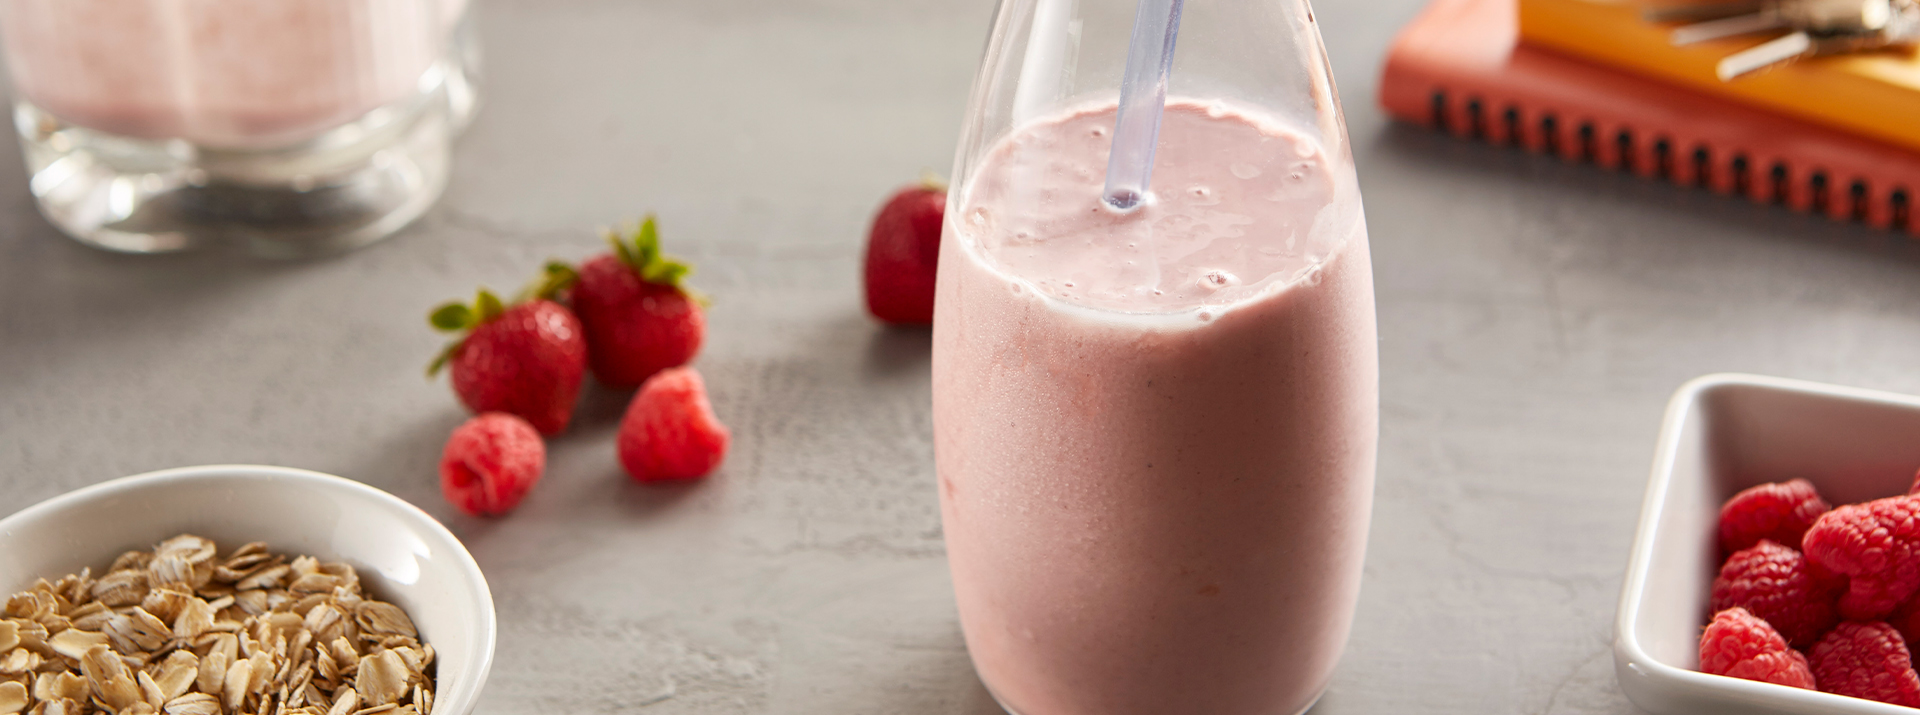 Oat-Pear-Berry Smoothie